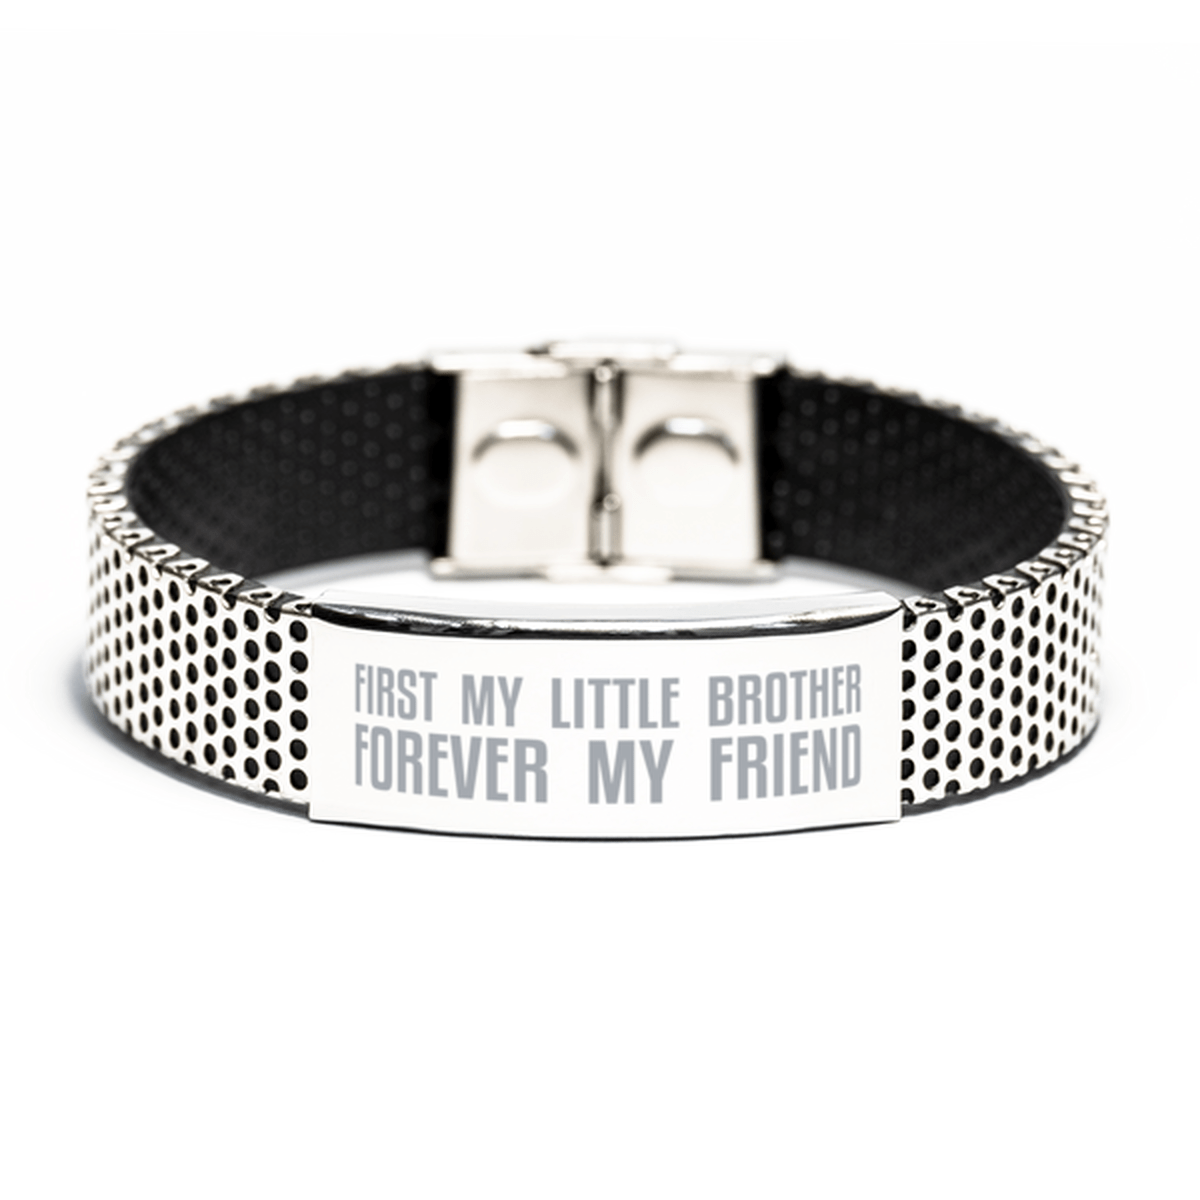 Unique Little Brother Stainless Steel Bracelet, First My Little Brother Forever My Friend, Best Gift for Little Brother Birthday, Christmas